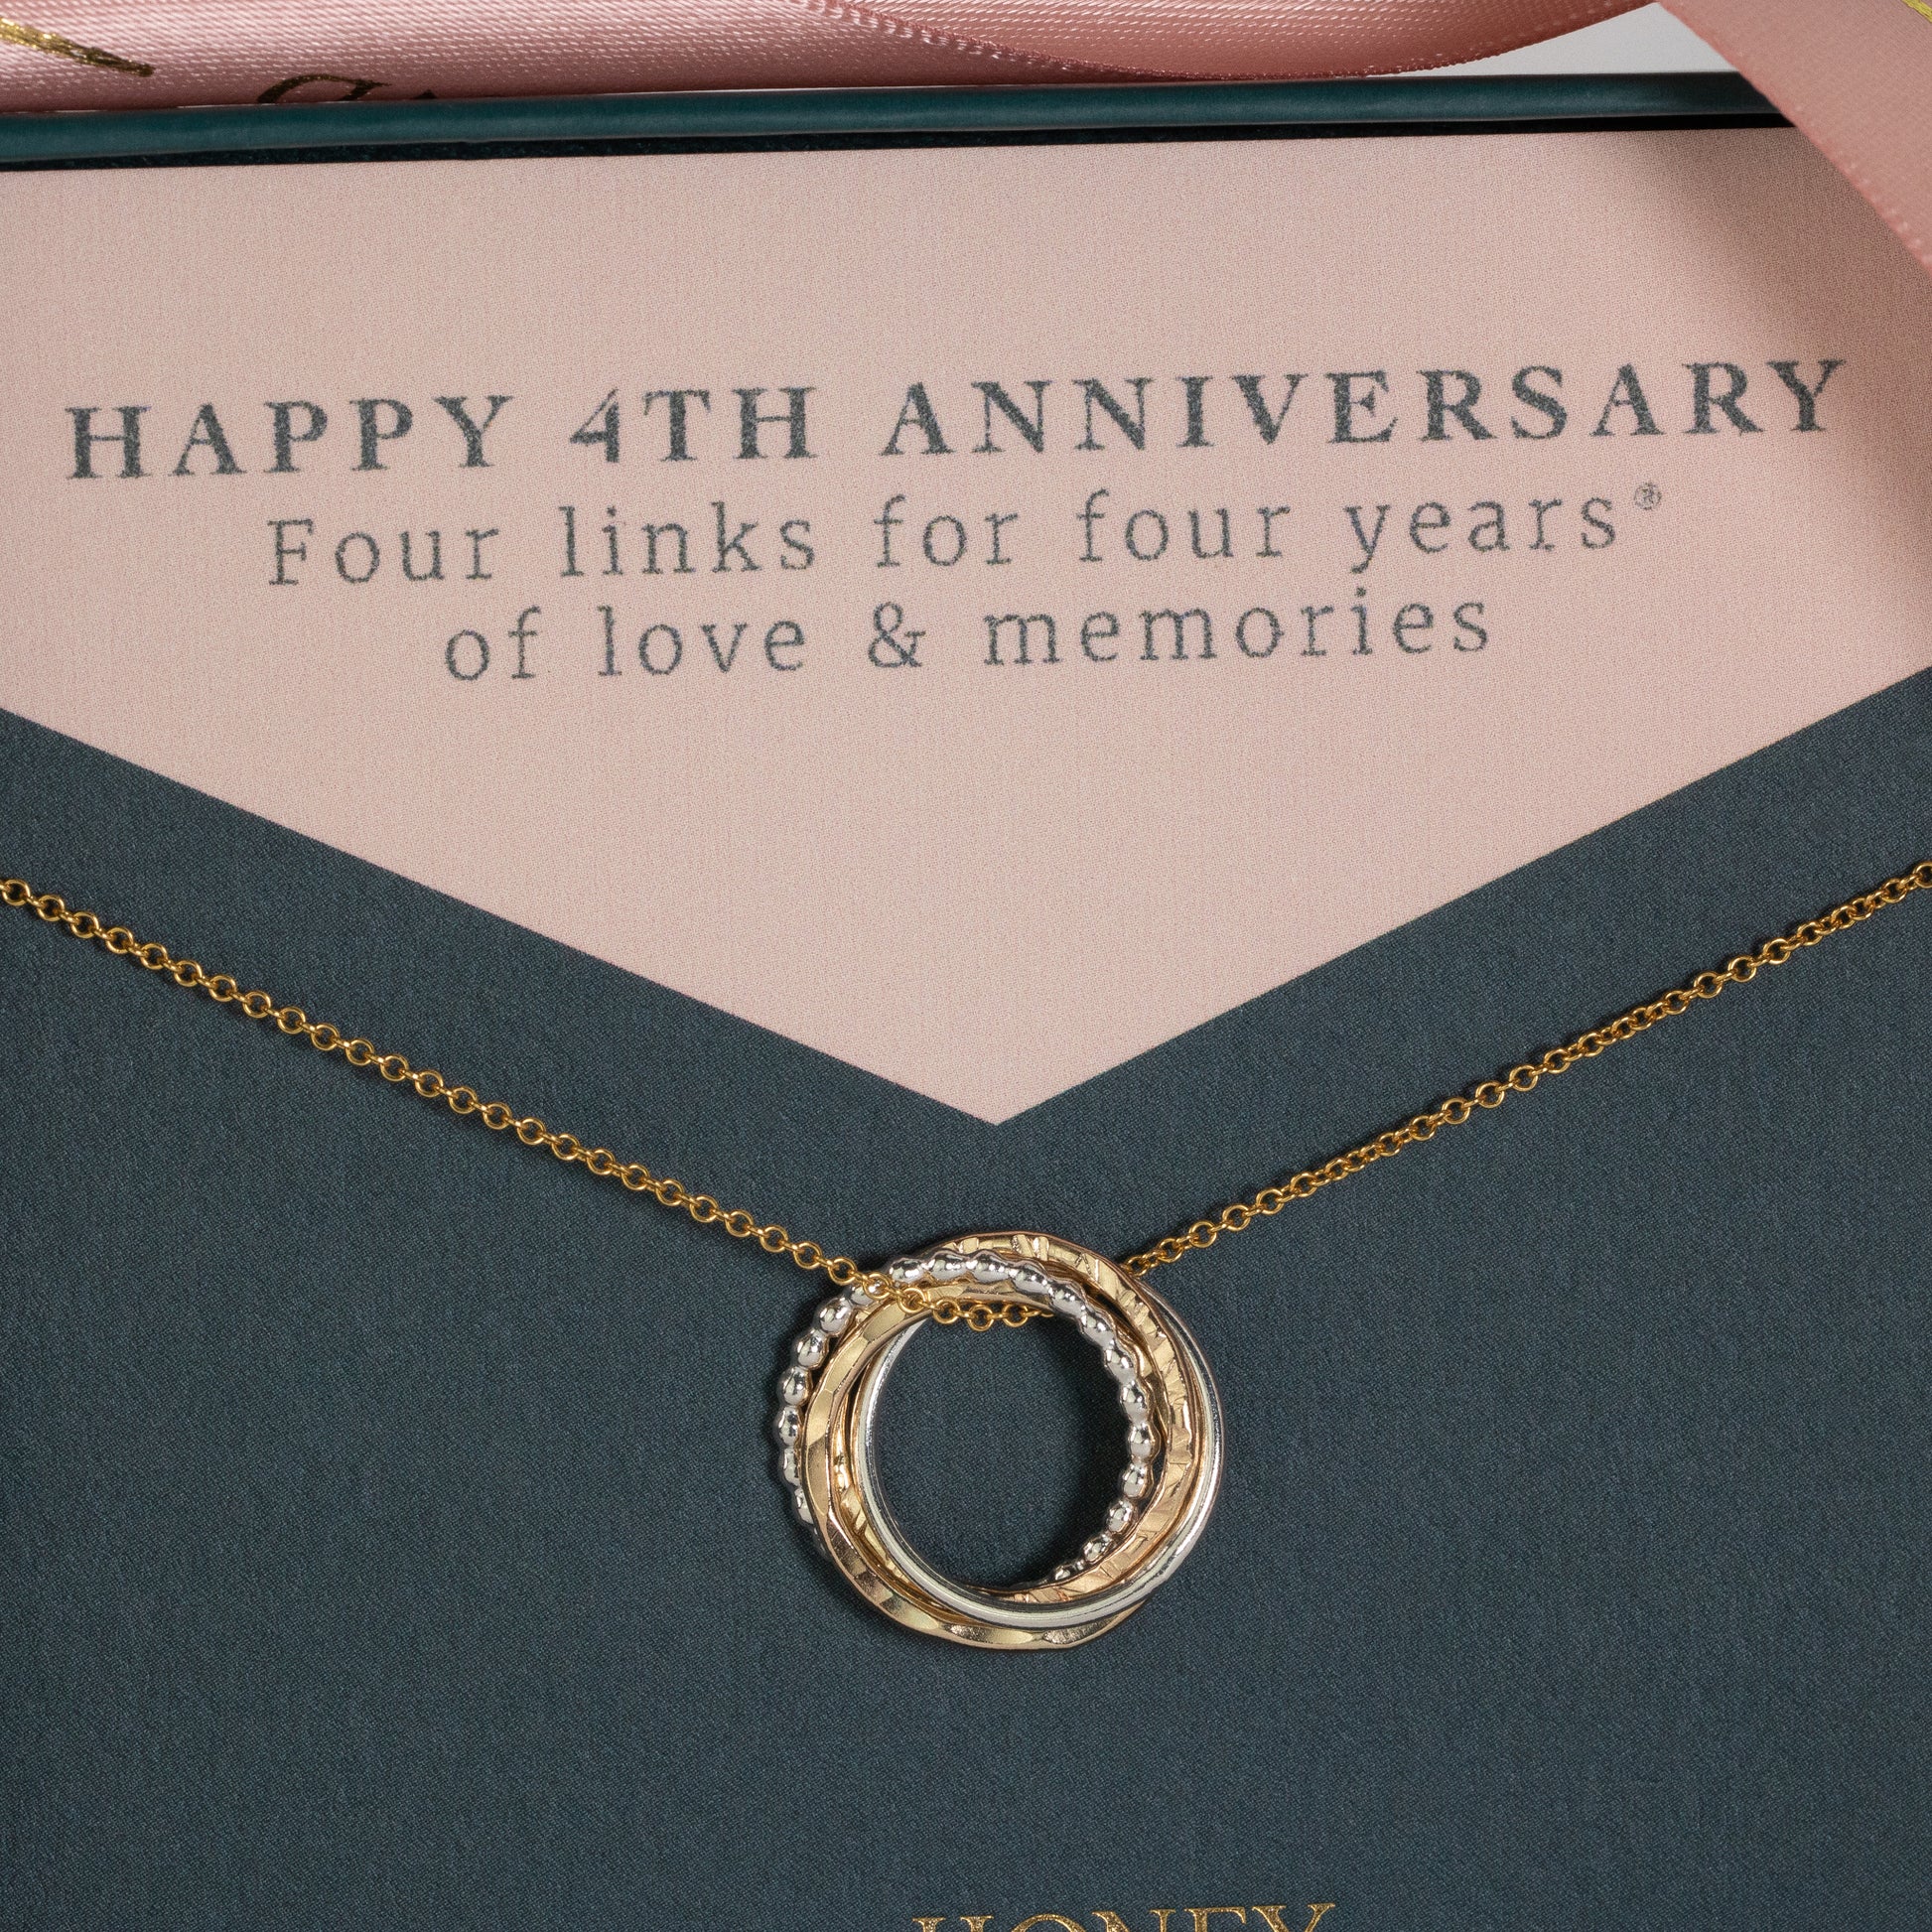 4th Anniversary Necklace - The Original 4 Rings for 4 Years Necklace - Petite Silver & Gold